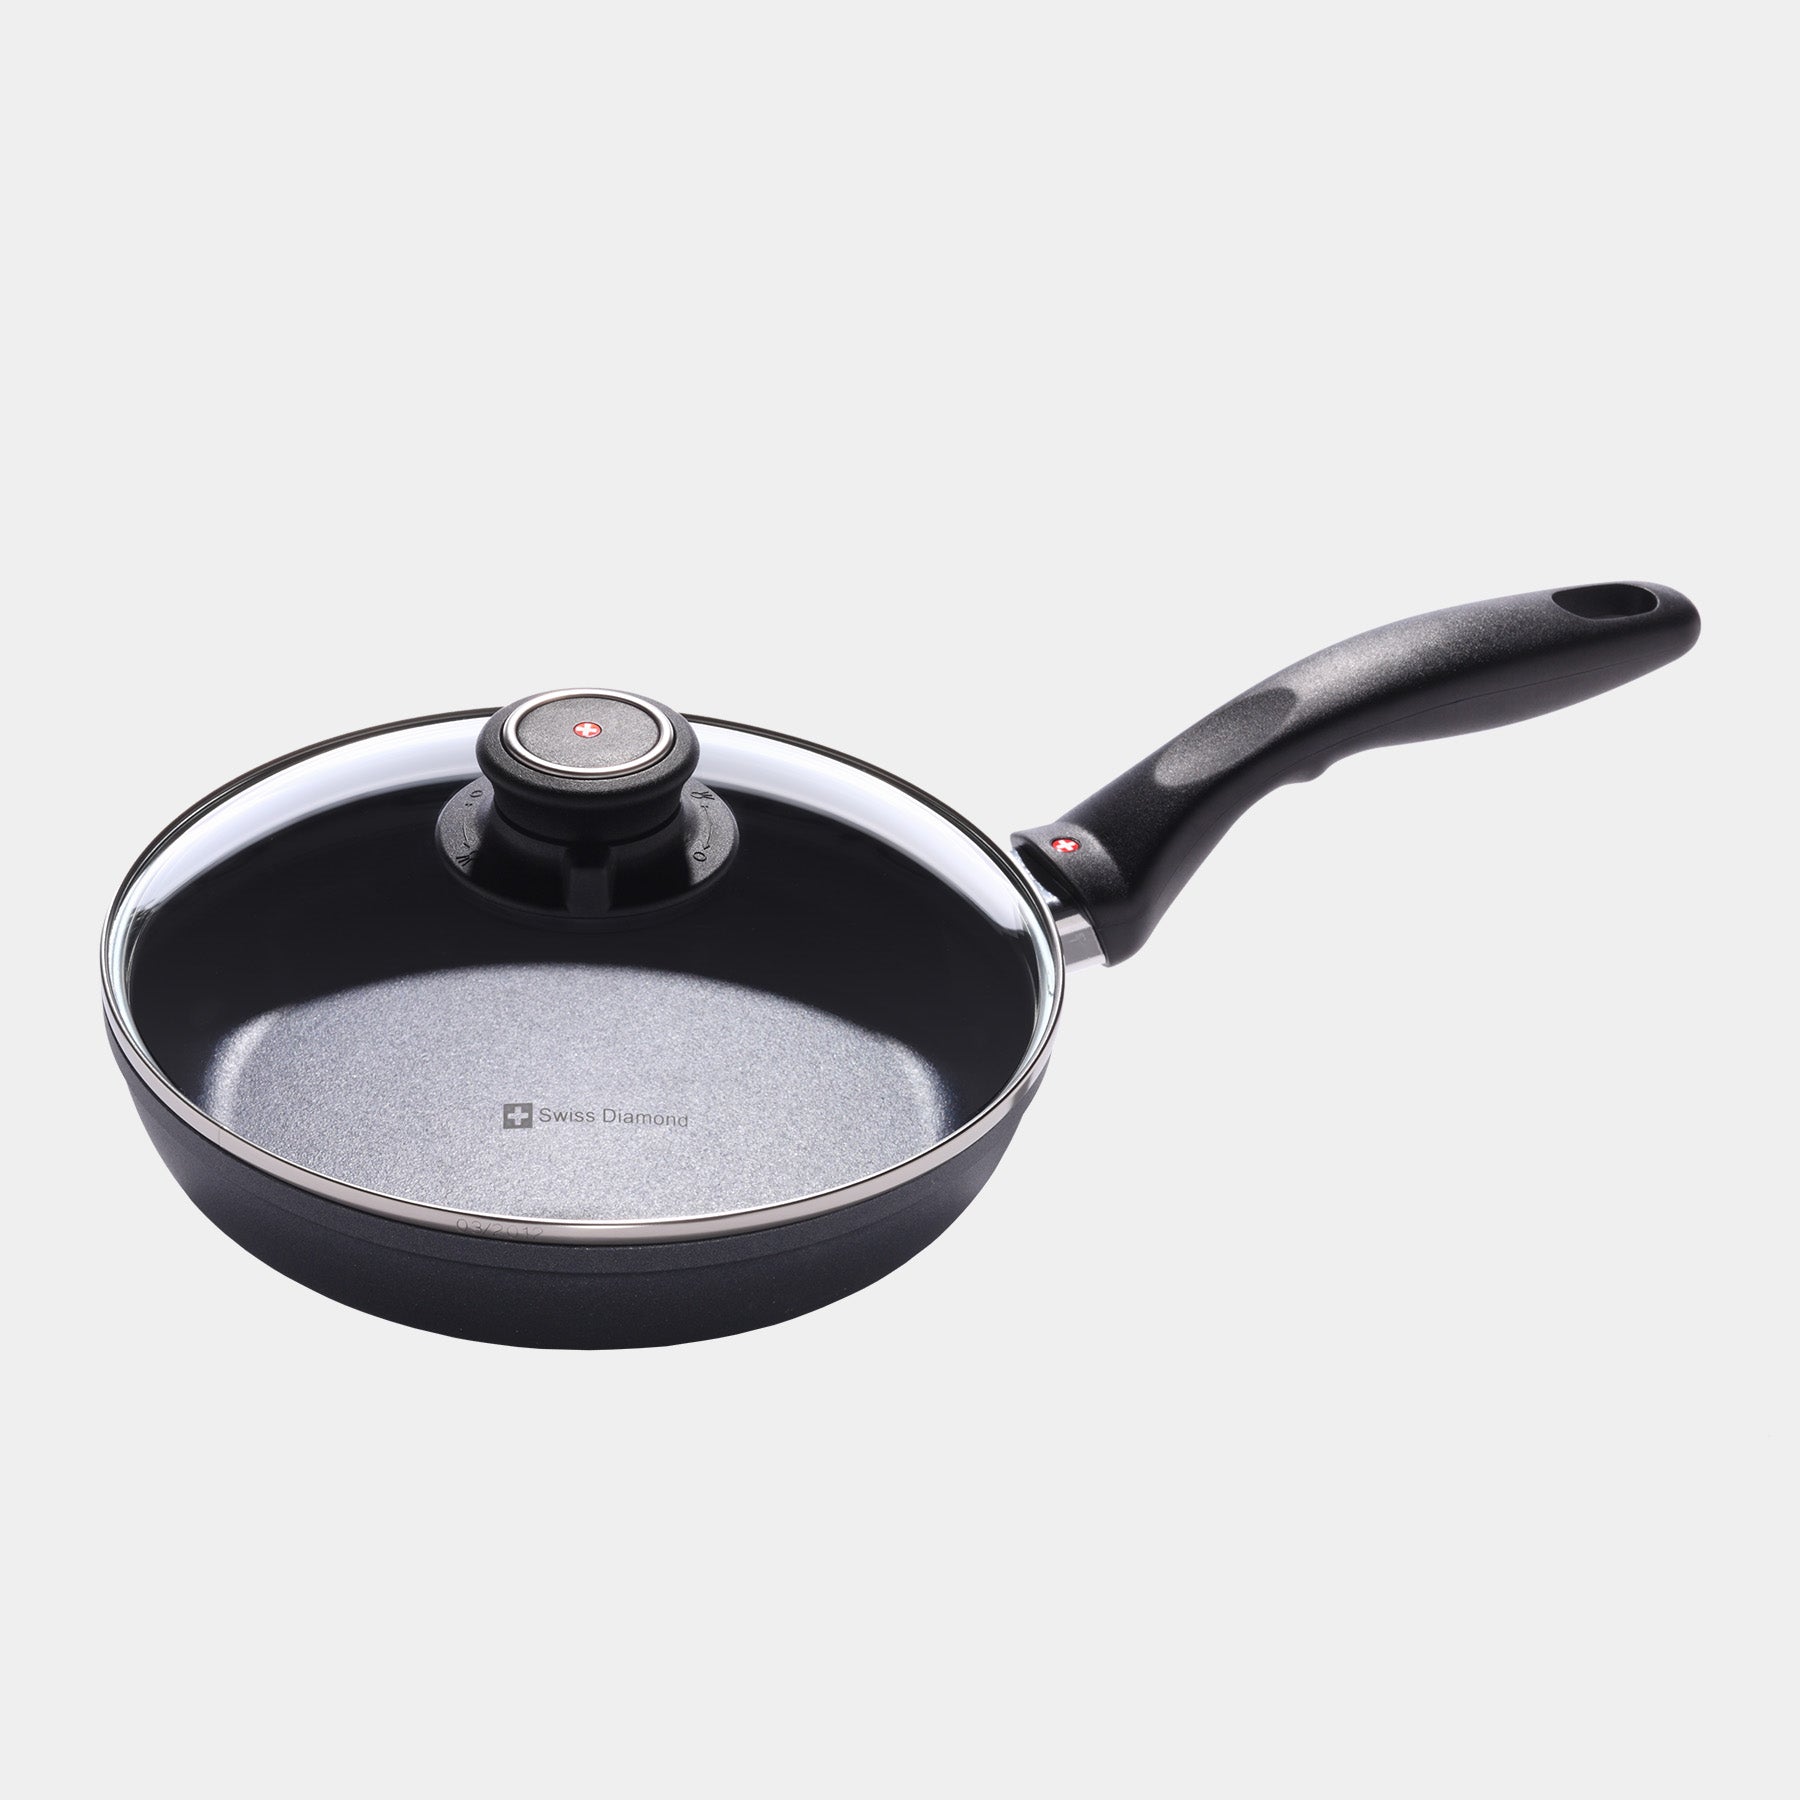 HD Nonstick 8" Fry Pan - Induction with glass lid